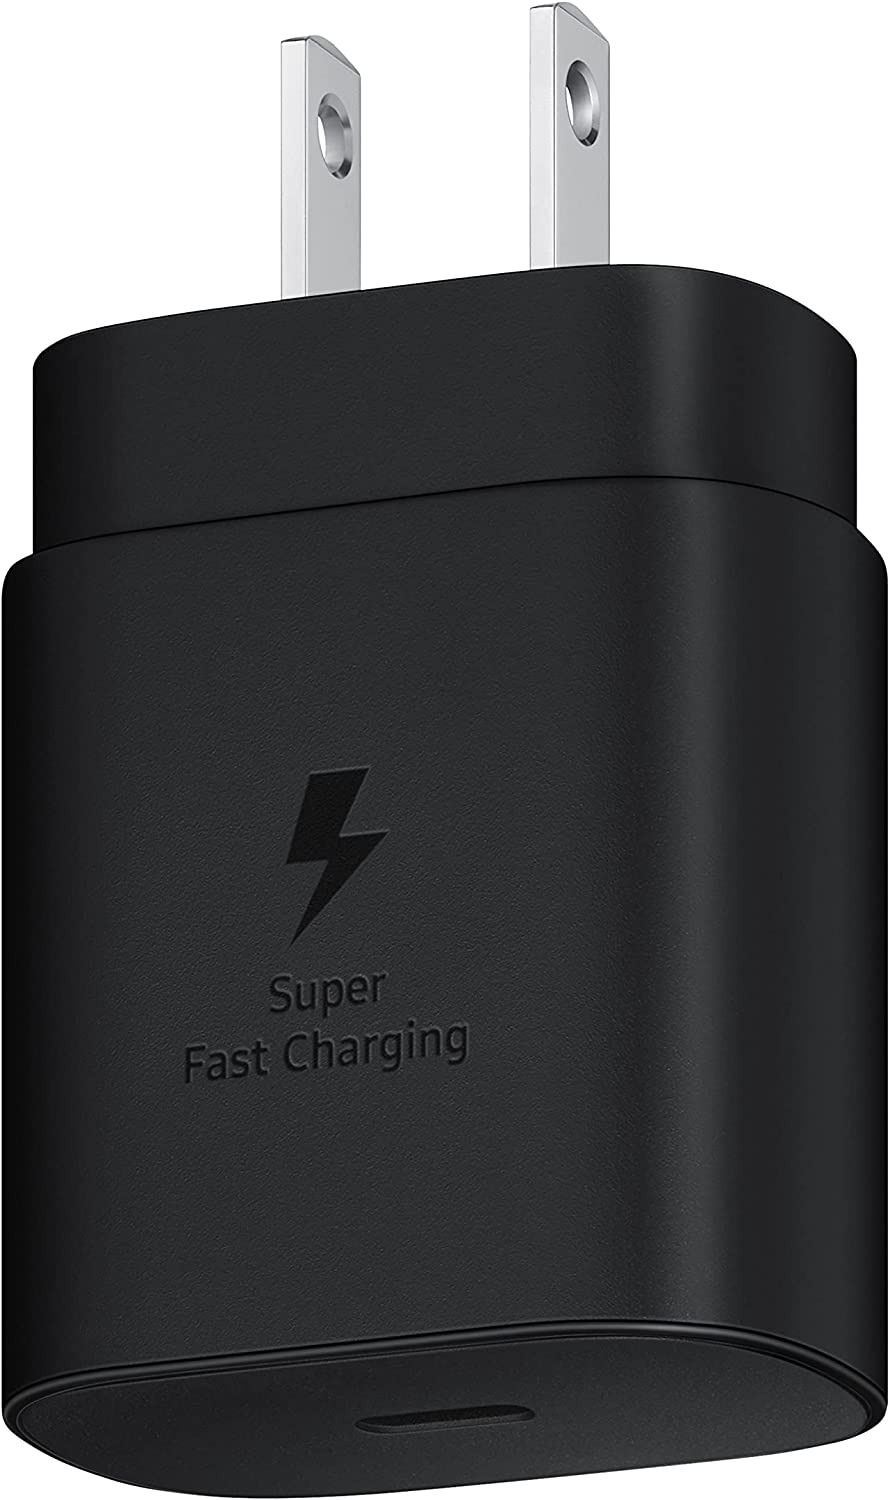 Samsung 25W USB-C Super Fast Wall Charger on a white background.